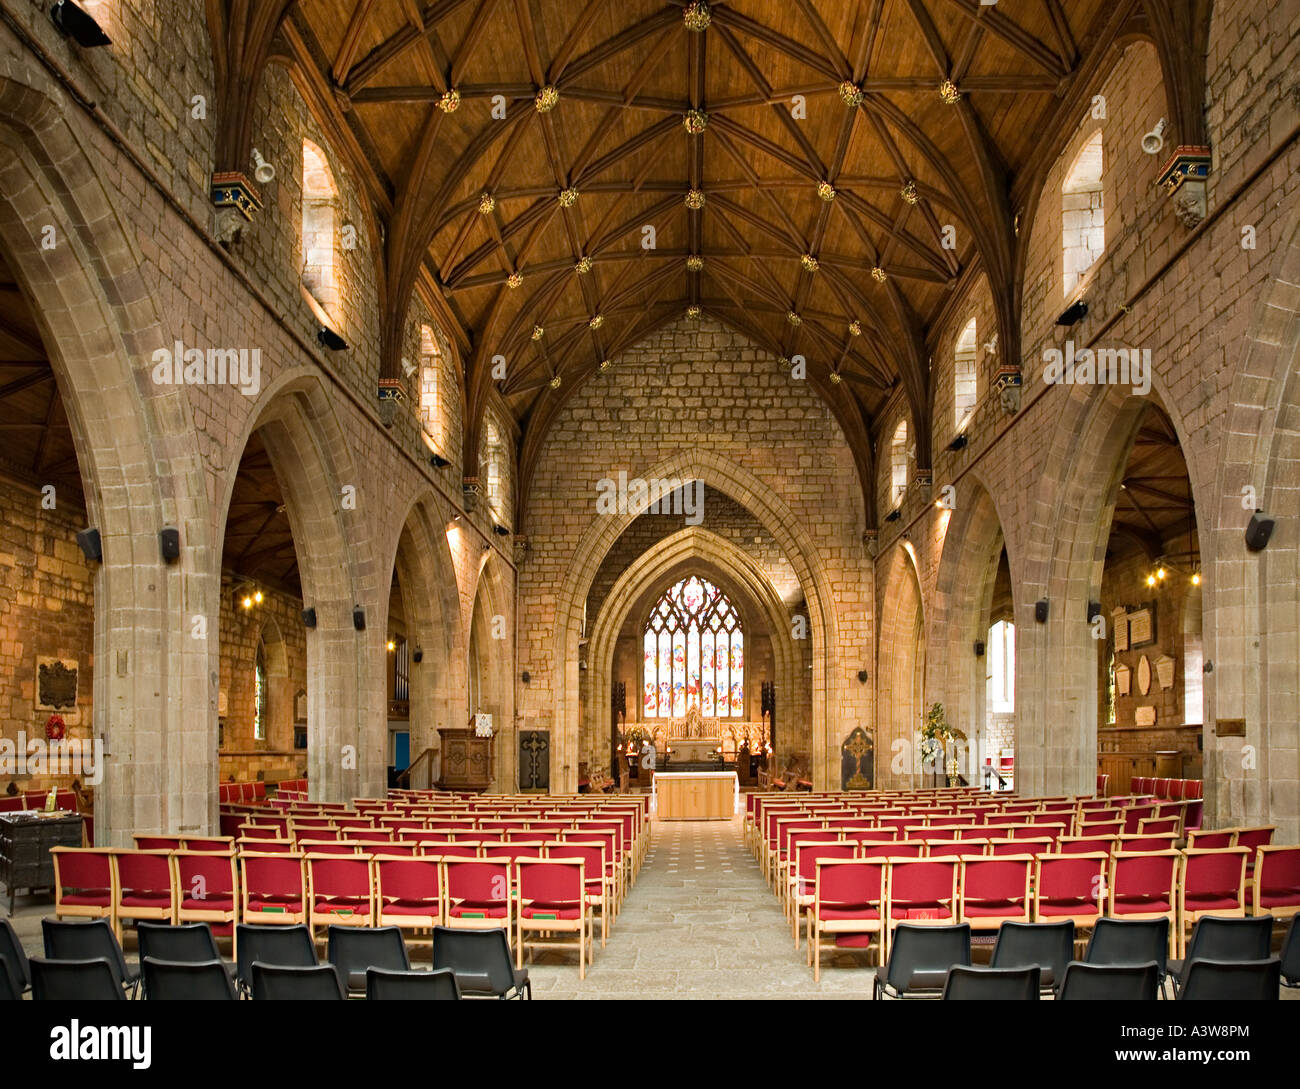 Interior of St Asaph Cathedral St Asaph Denbighshire Wales UK Stock Photo